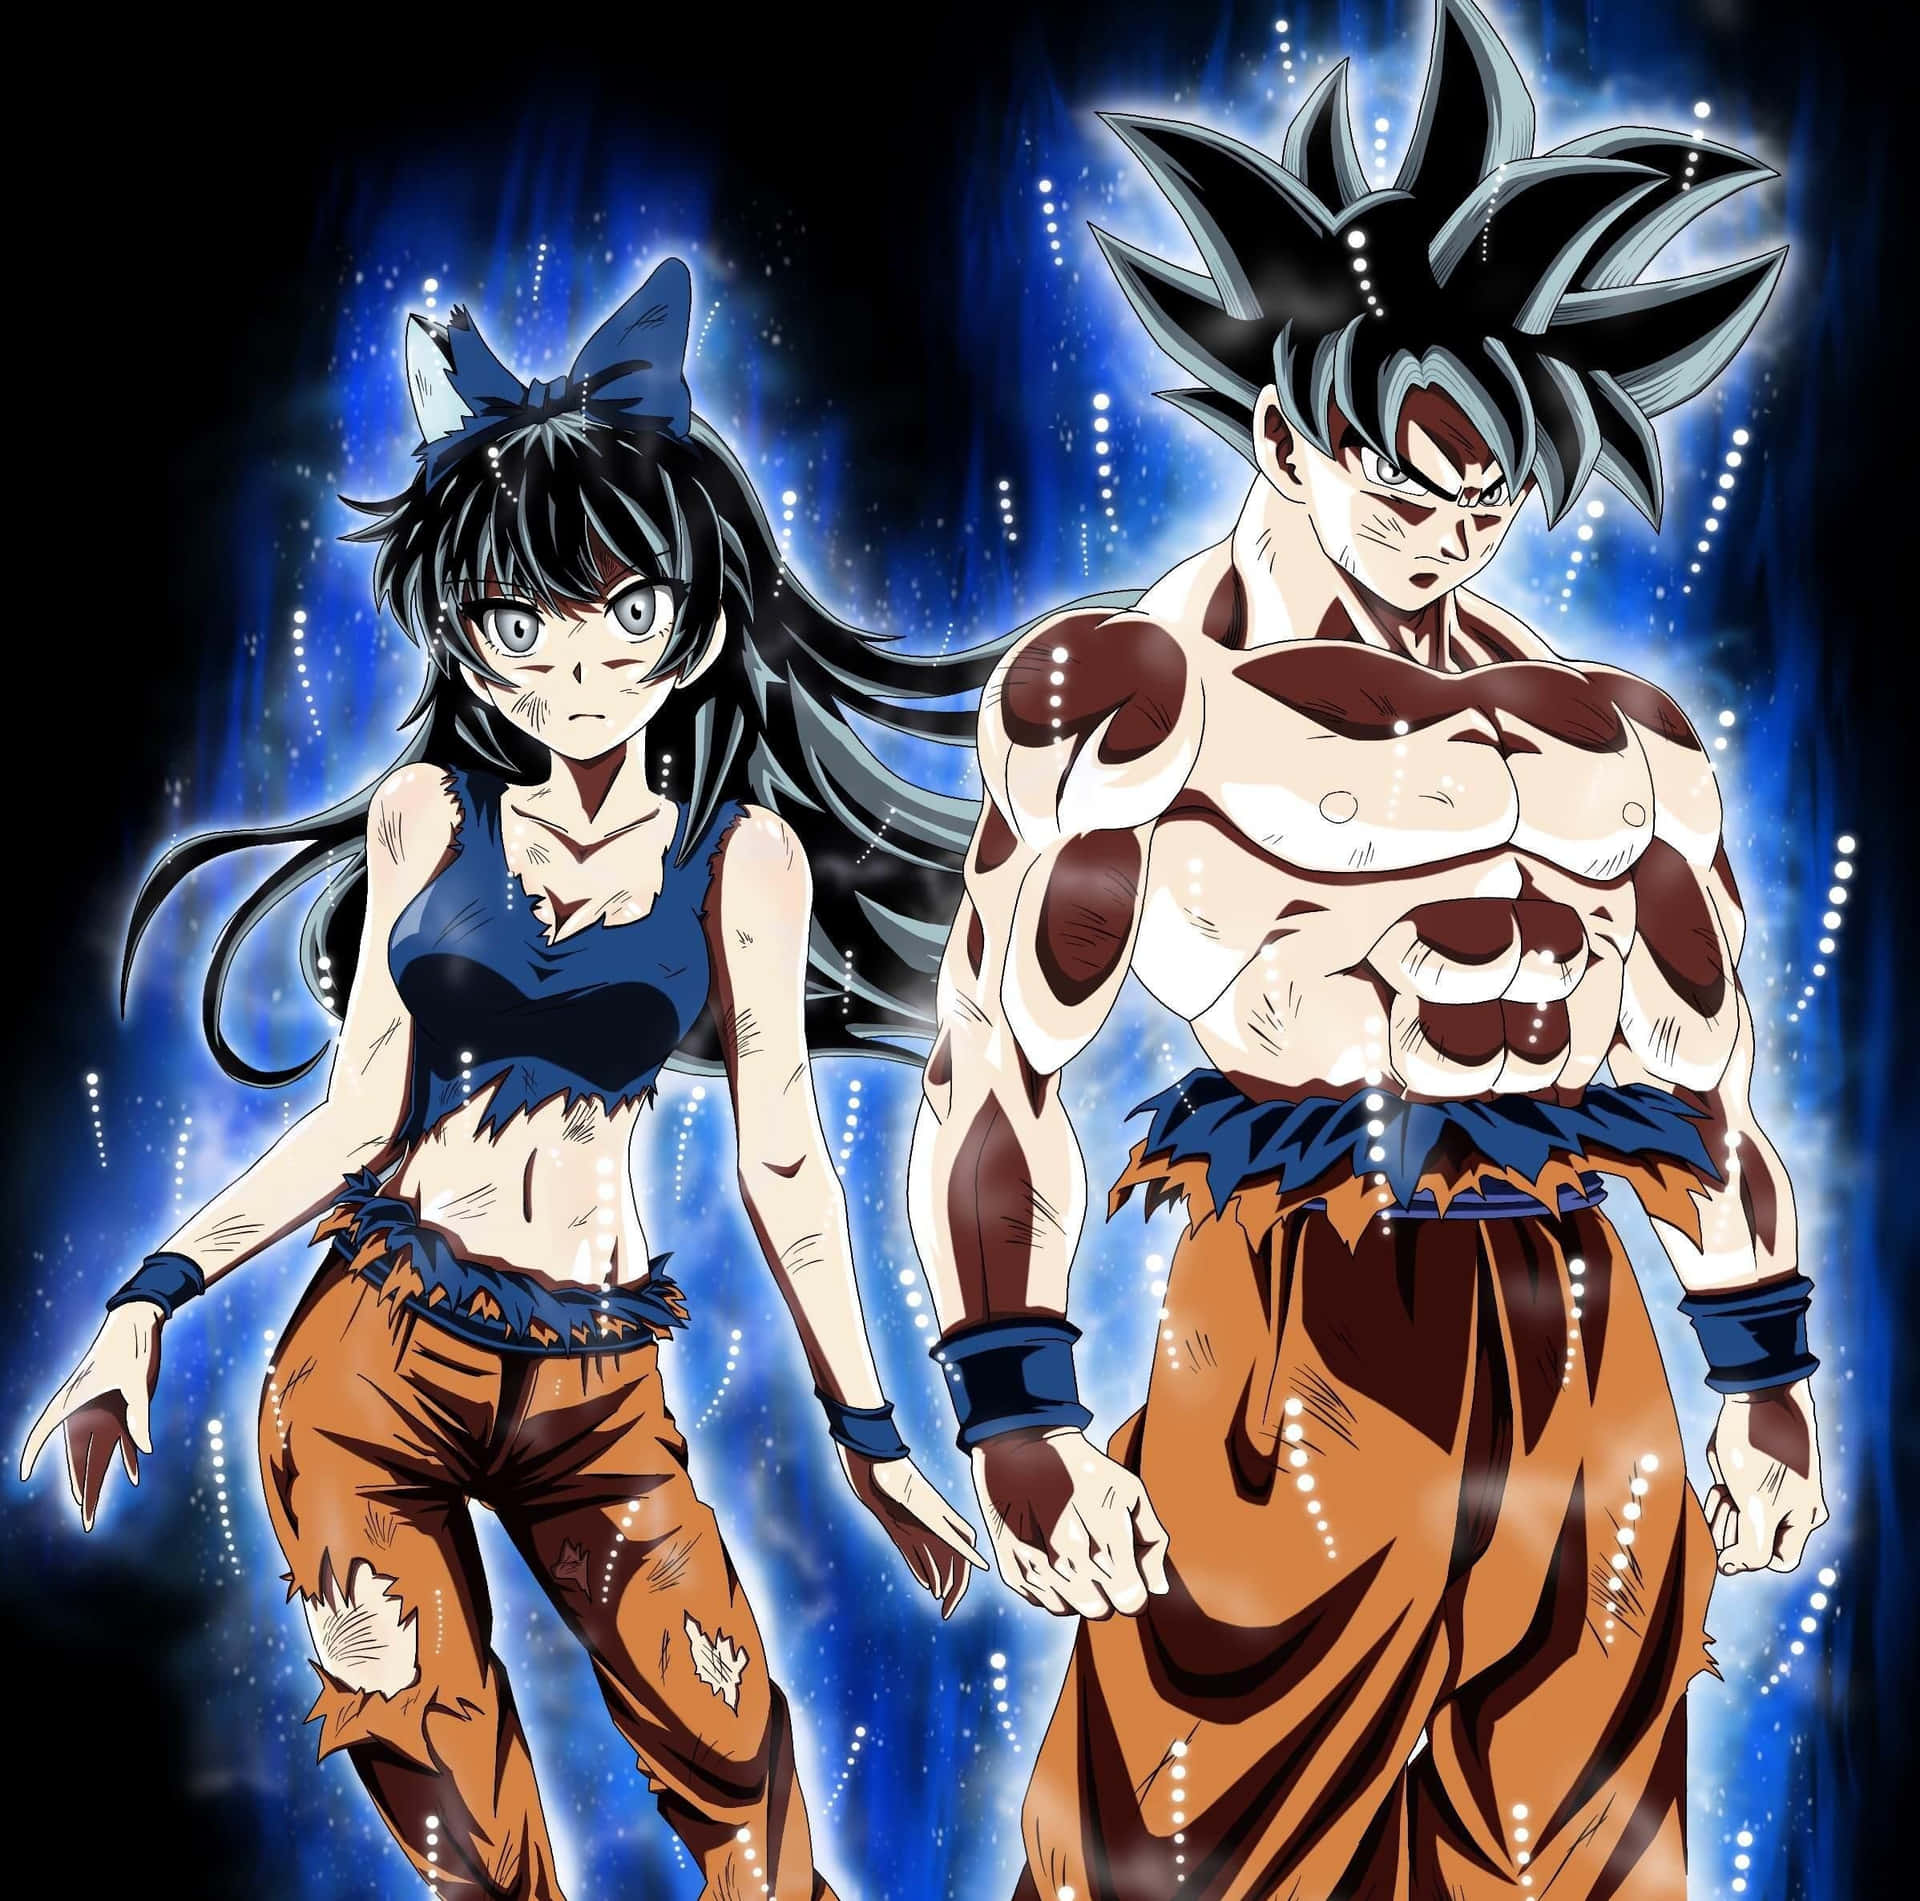 "Love prevails between the powerful couple Goku and Chichi" Wallpaper